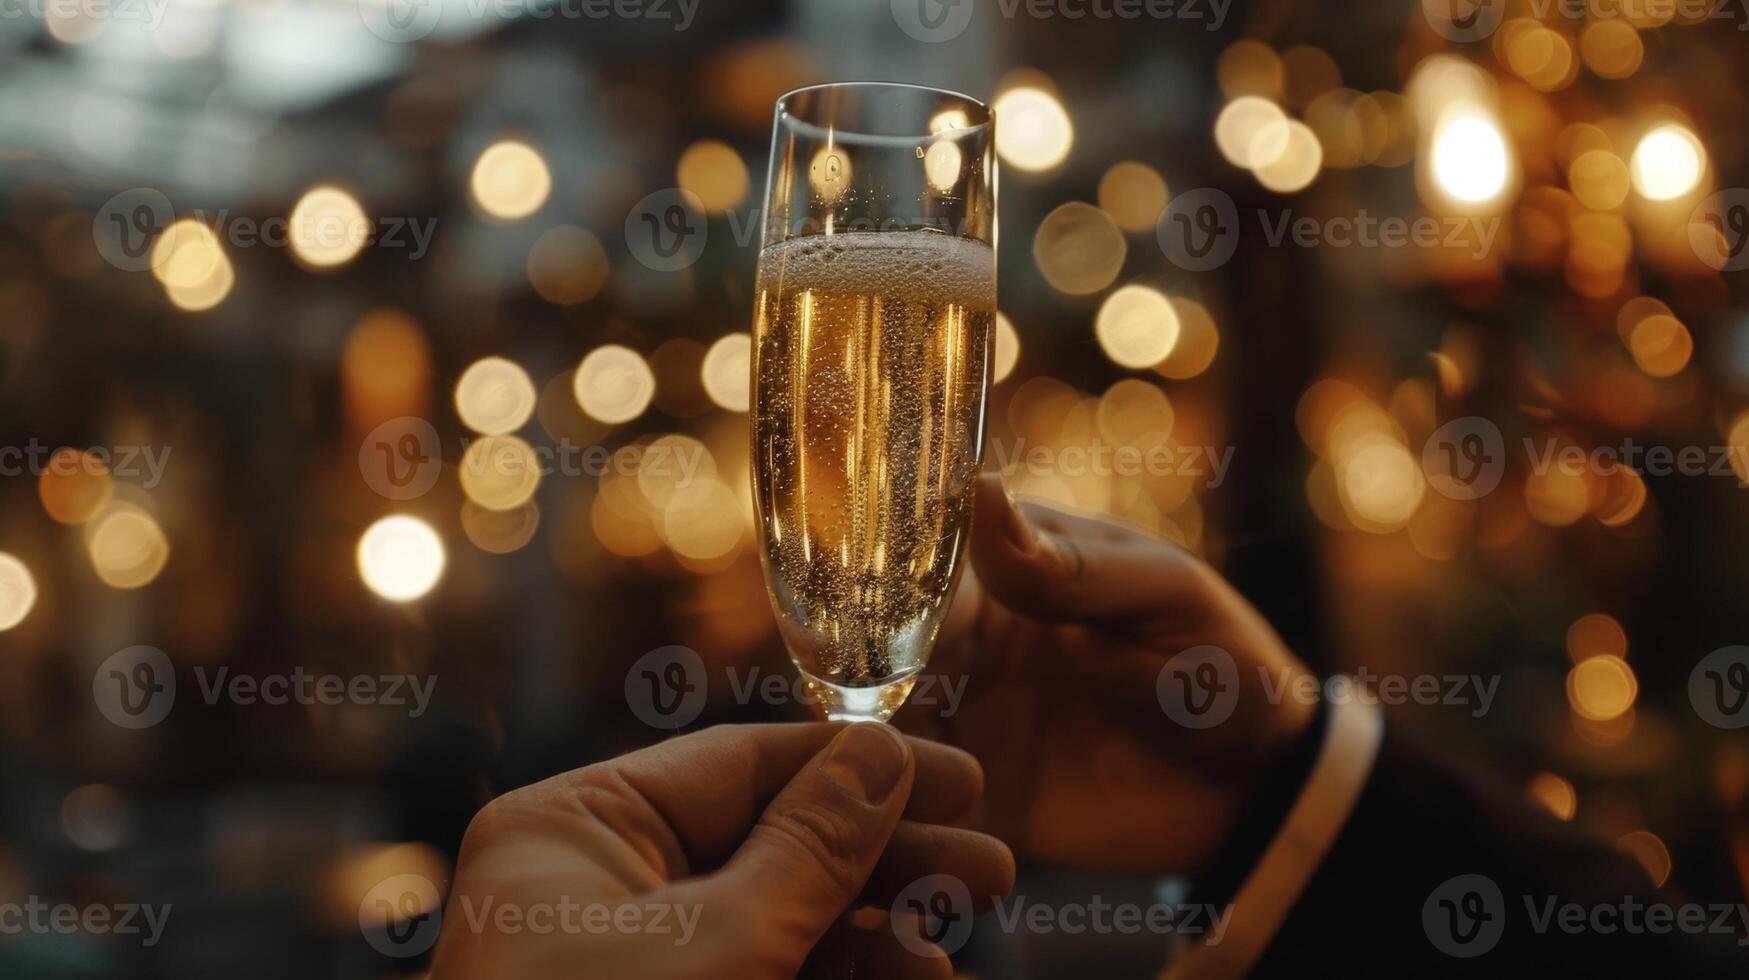 A hand holding a tall glass of bubbly zeroalcohol champagne a staple beverage in a Frenchstyle evening aperitif photo